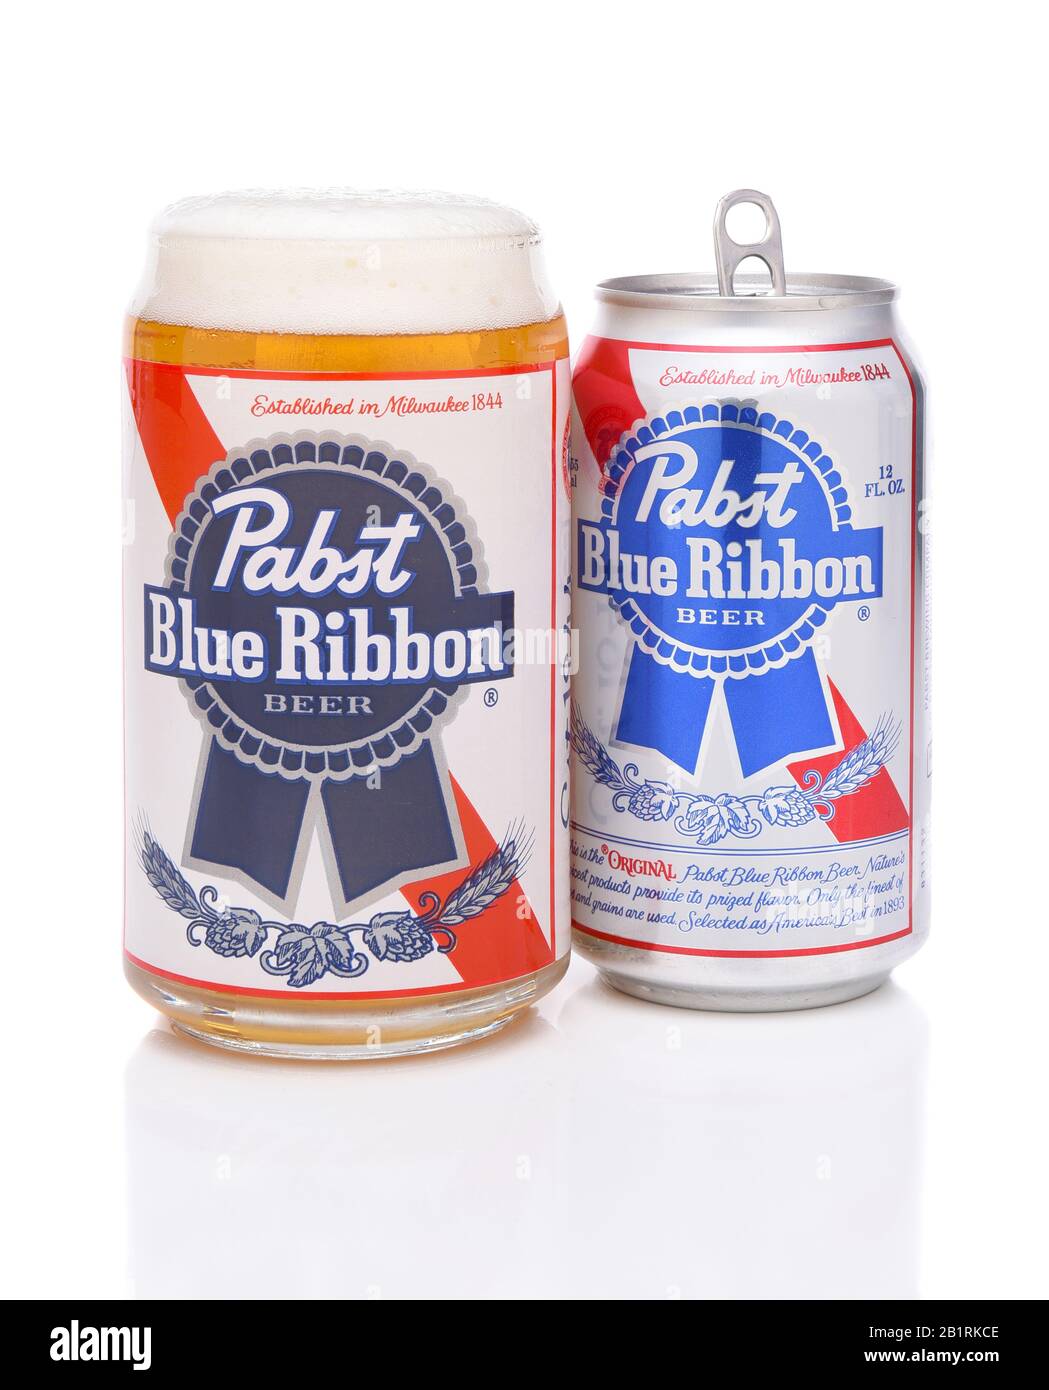 https://c8.alamy.com/comp/2B1RKCE/irvine-california-march-16-2017-pabst-blue-ribbon-beer-a-glass-and-can-of-the-american-brand-introduced-in-1884-in-milwaukee-currently-based-in-2B1RKCE.jpg